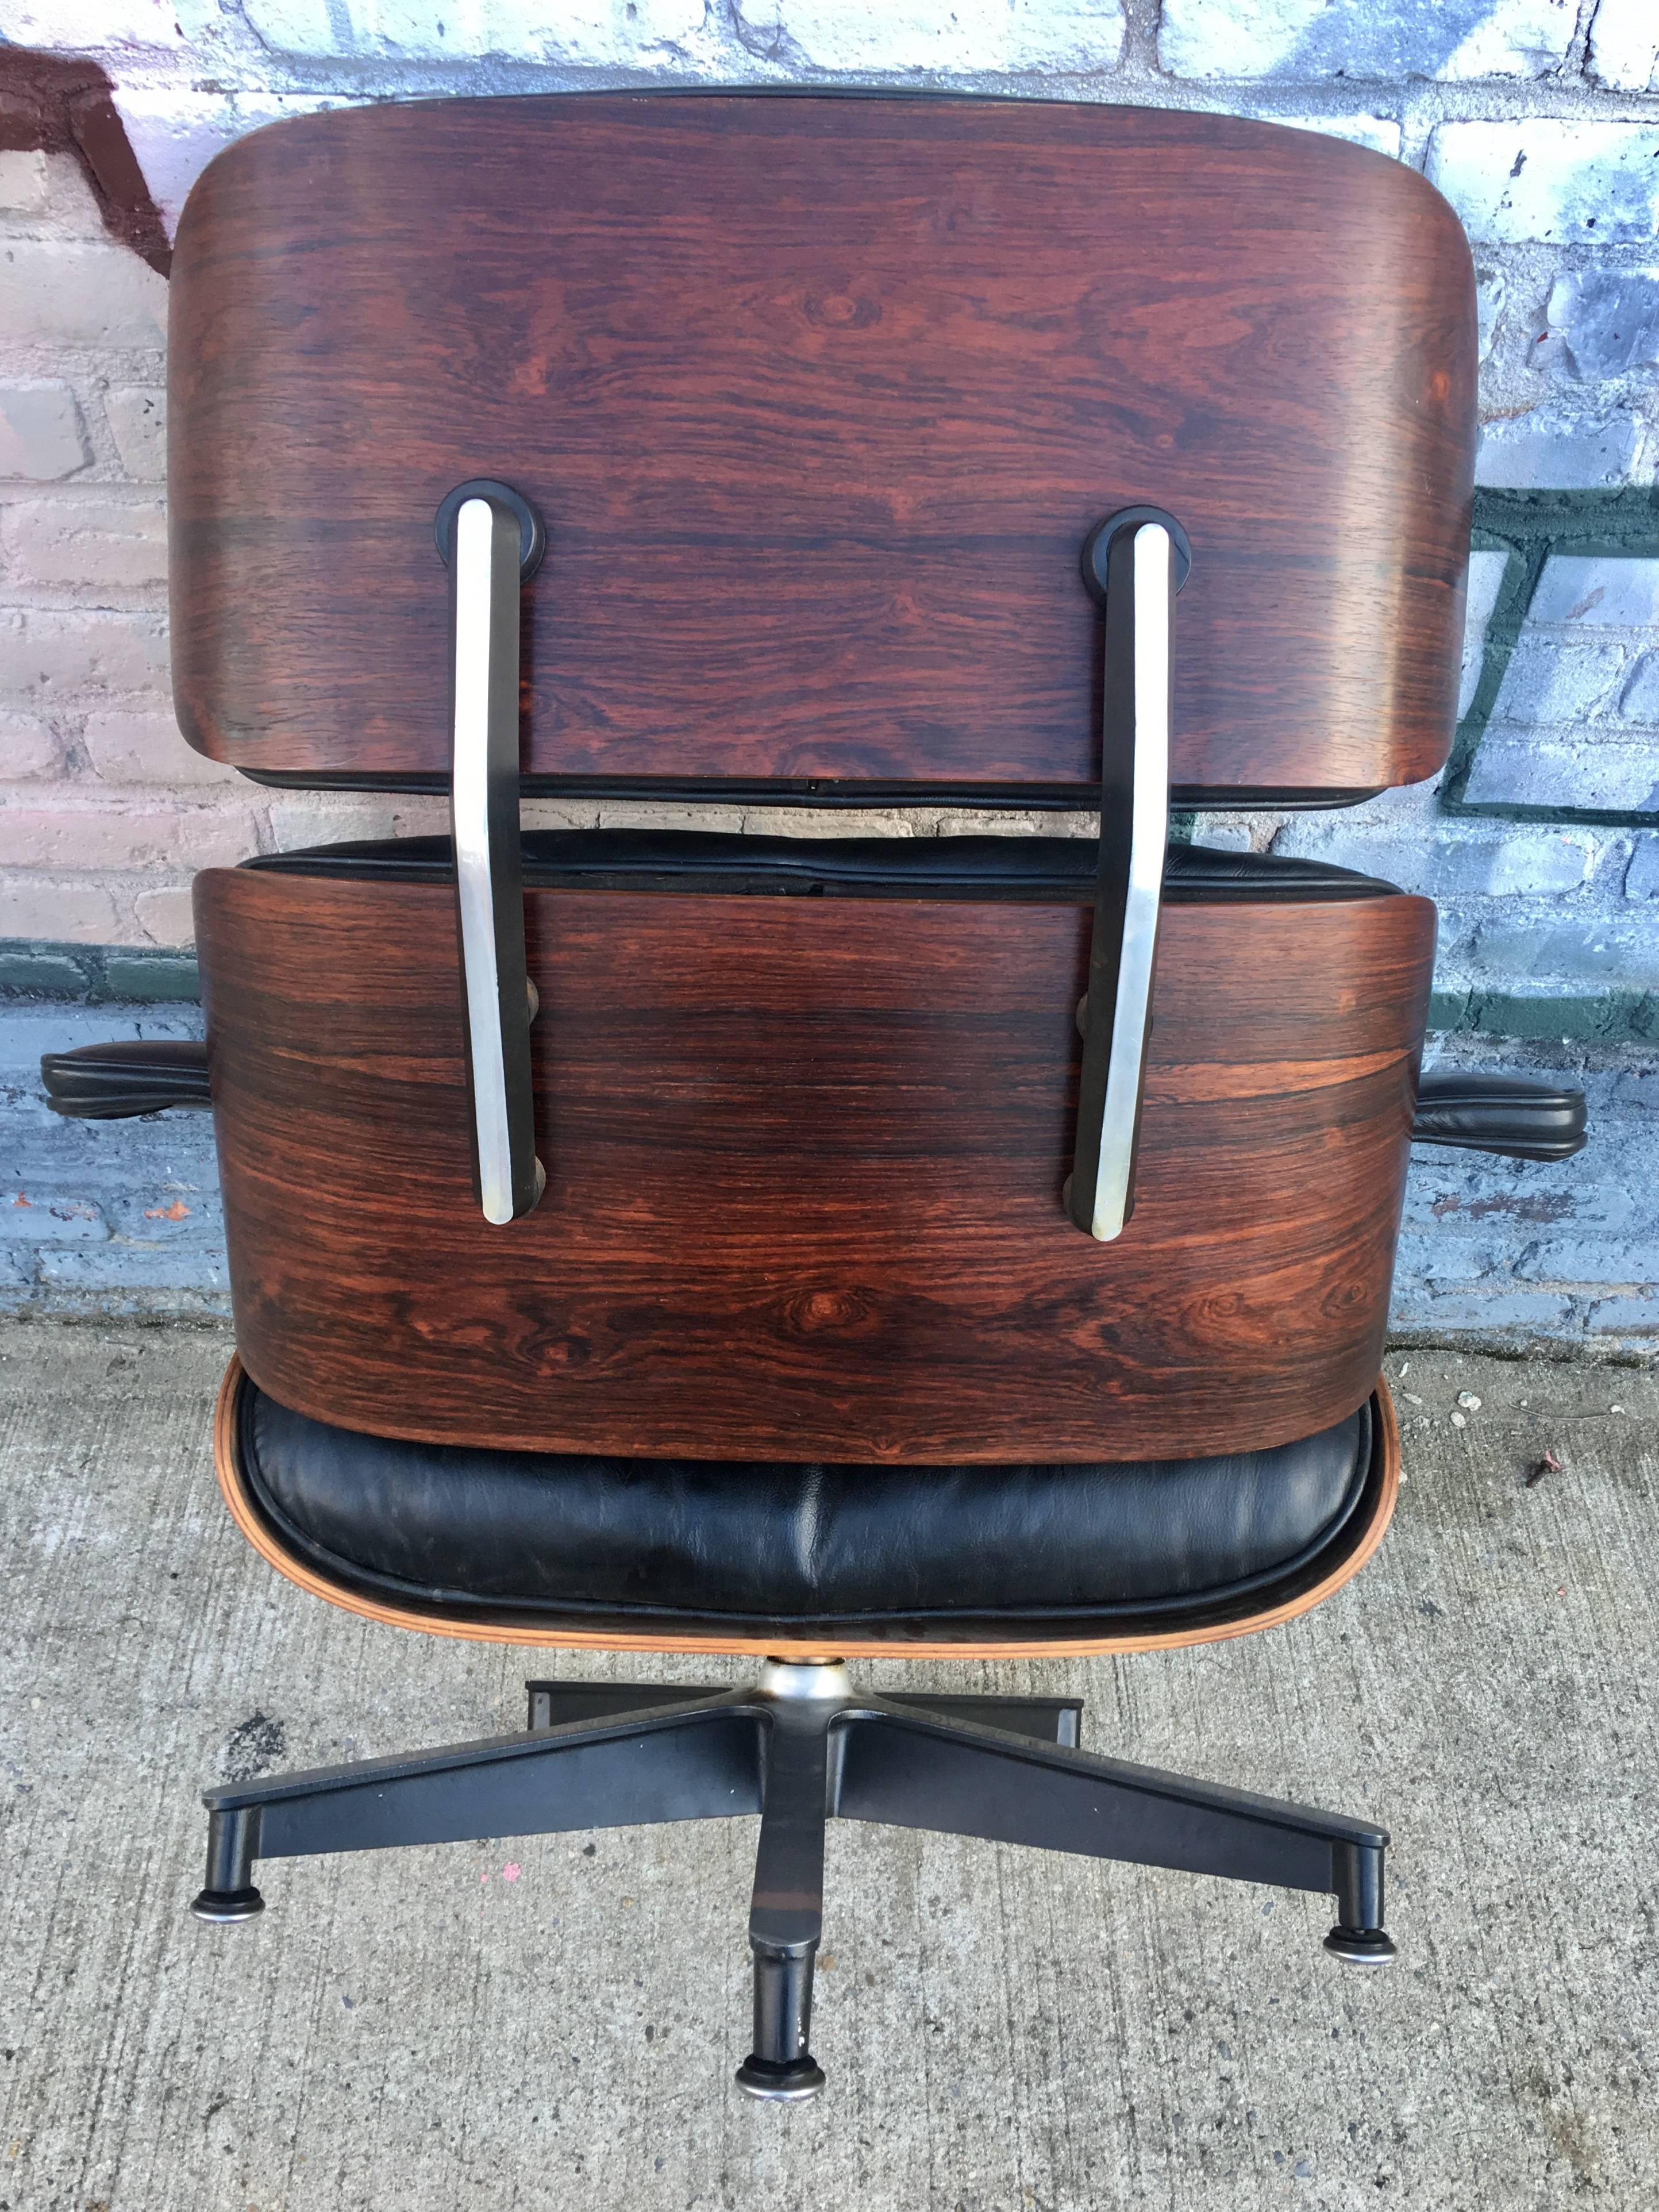 Early 1960s Down Filled Herman Miller Eames lounge chair and ottoman. All original in very good condition for a piece this age. Gorgeous deep rosewood grains and color. Original chair and ottoman. All original parts.